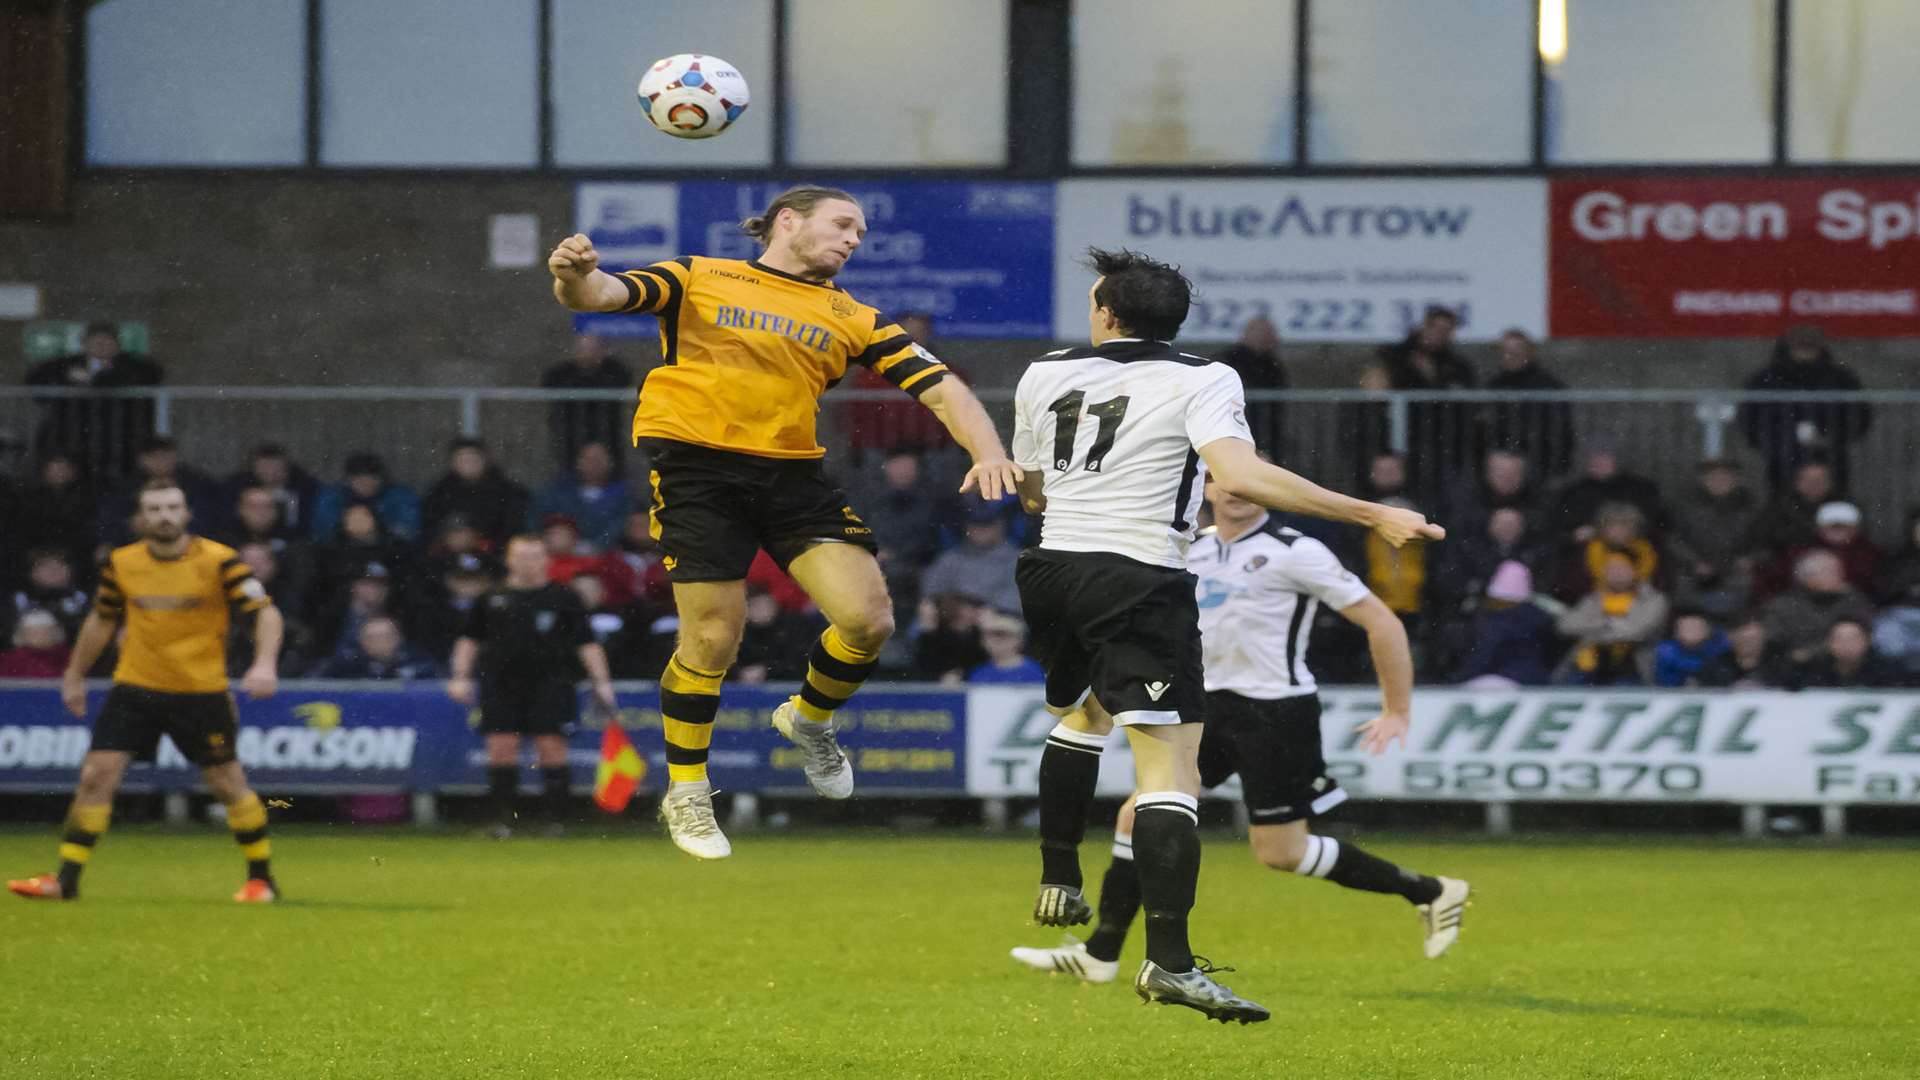 Maidstone winger Matt Bodkin has joined Leatherhead Picture: Andy Payton